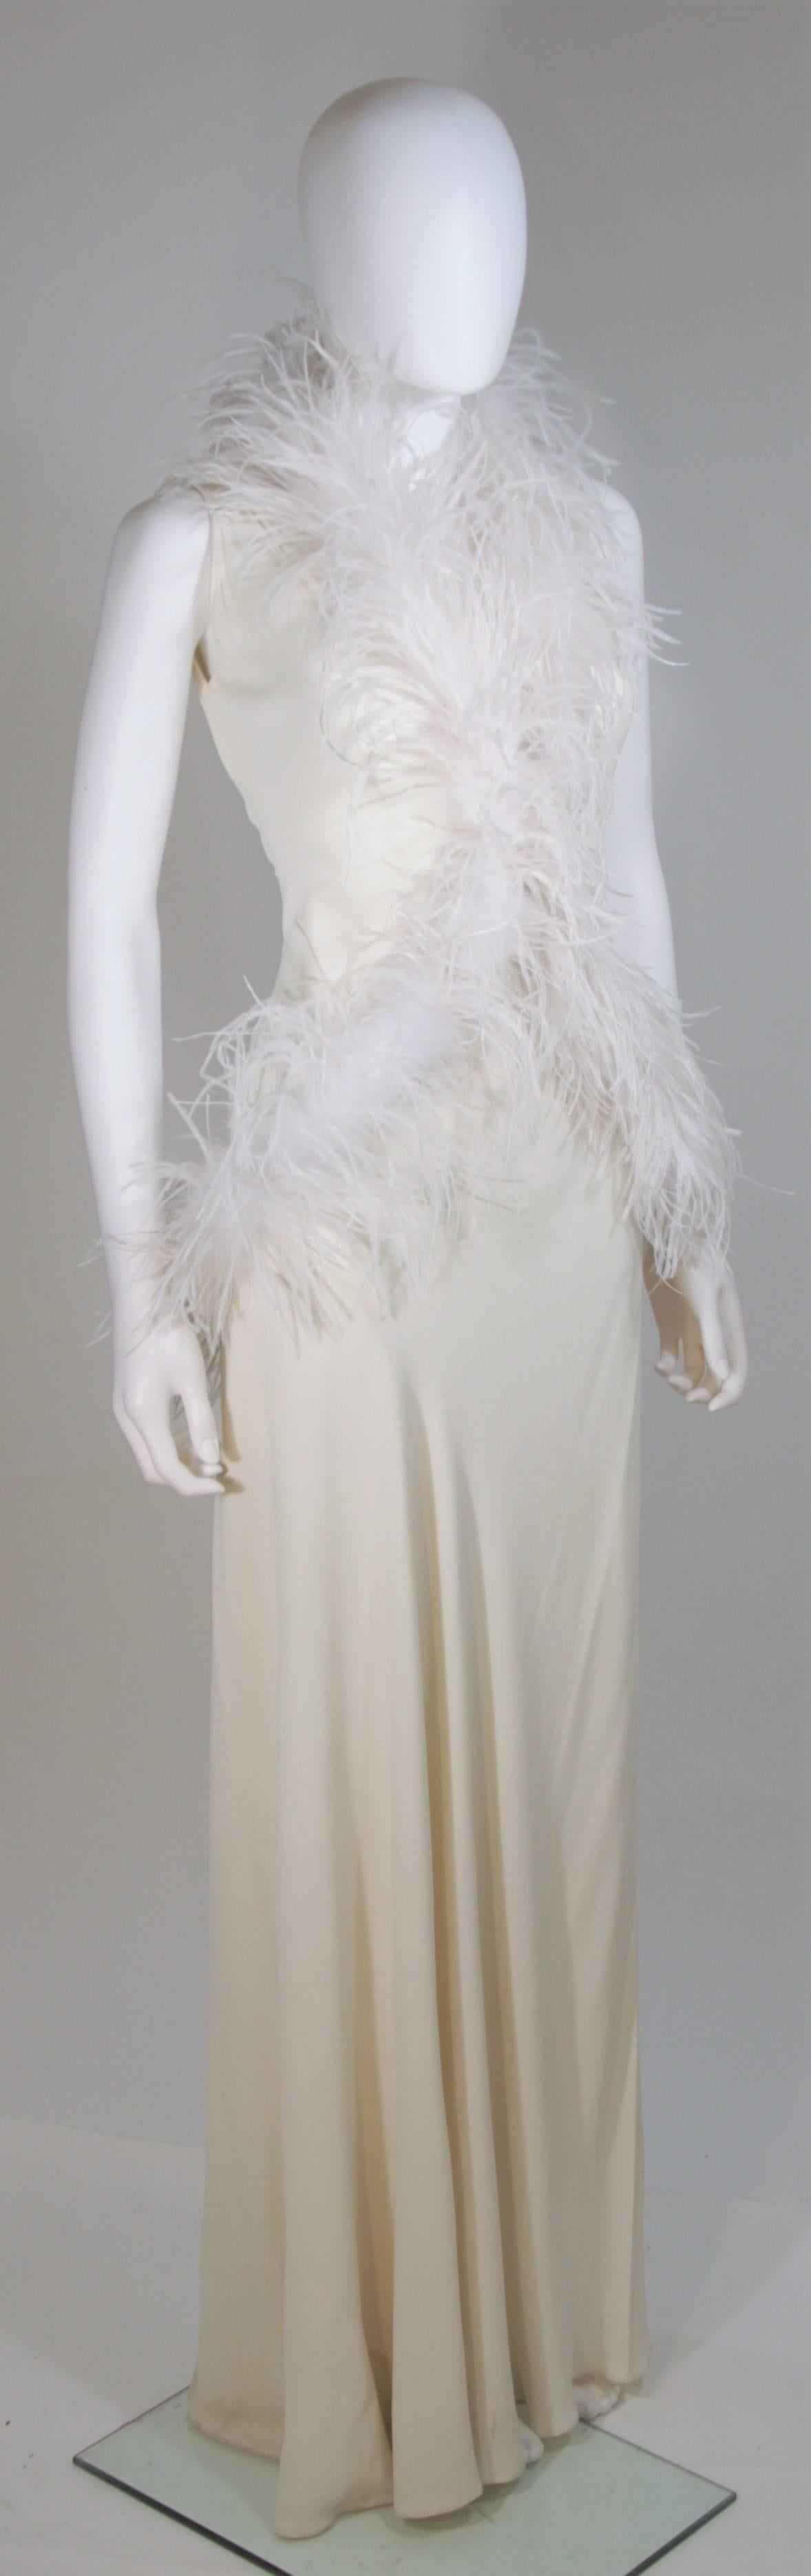 Women's ELIZABETH MASON COUTURE Feather Wrap with Rhinestone Closure Made to Order For Sale